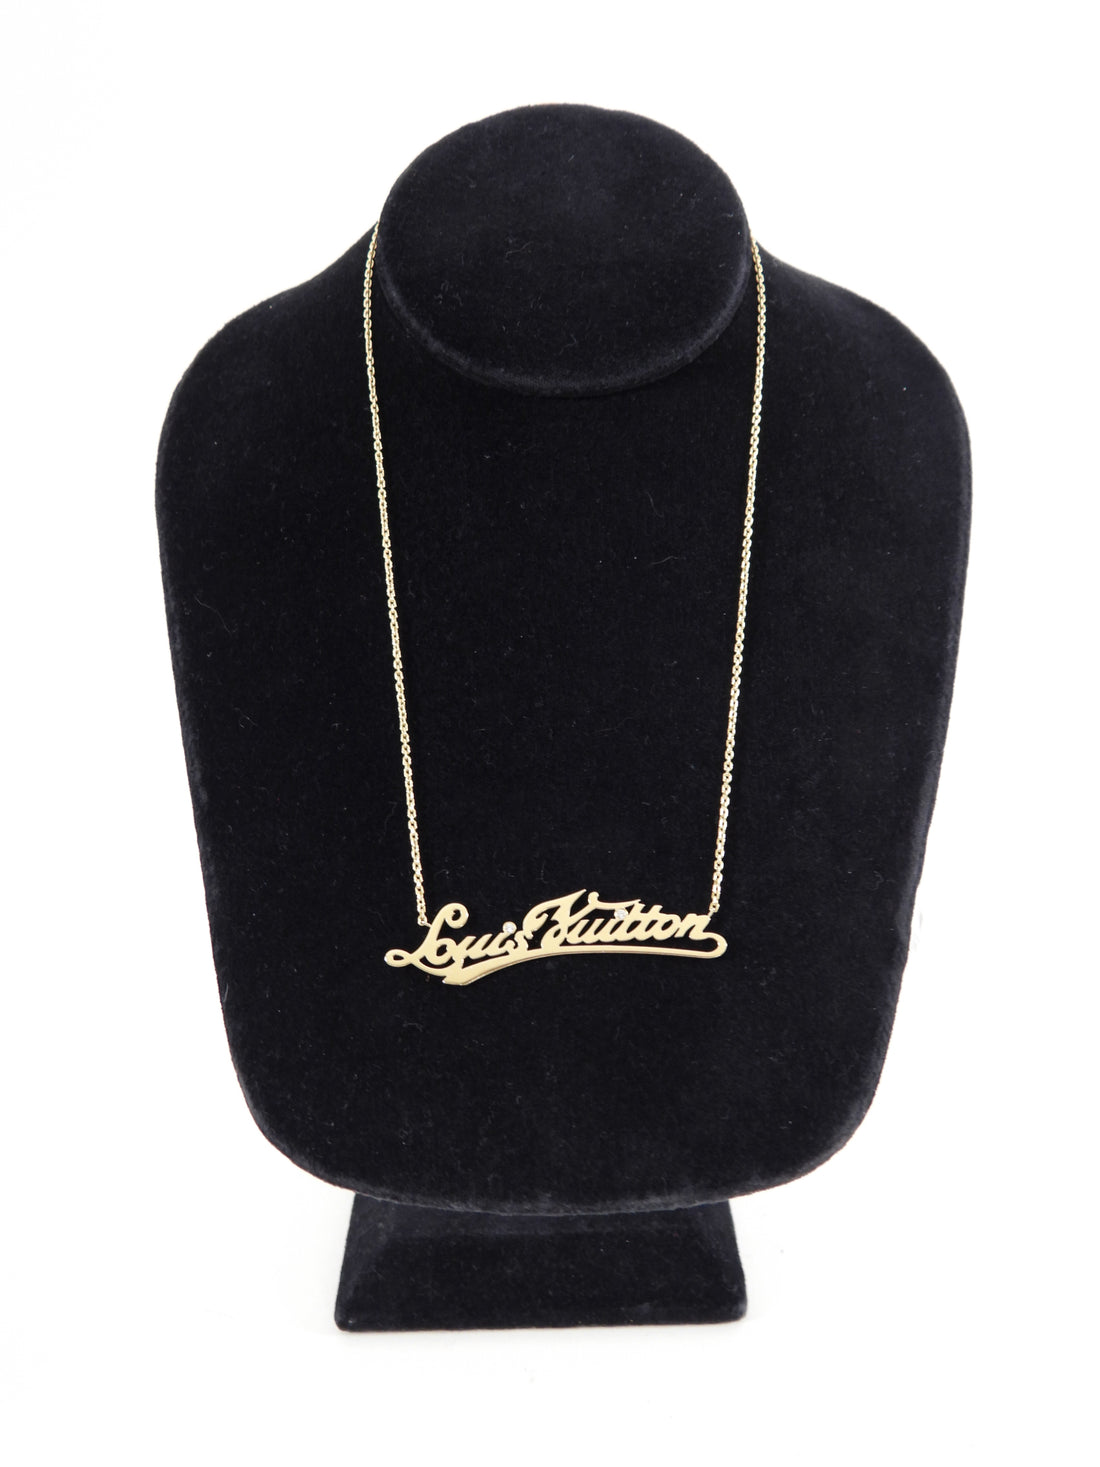 Louis Vuitton Diamond Signature ID Name Plate Necklace 18K Yellow Gold –  The Jewelry Gallery of Oyster Bay